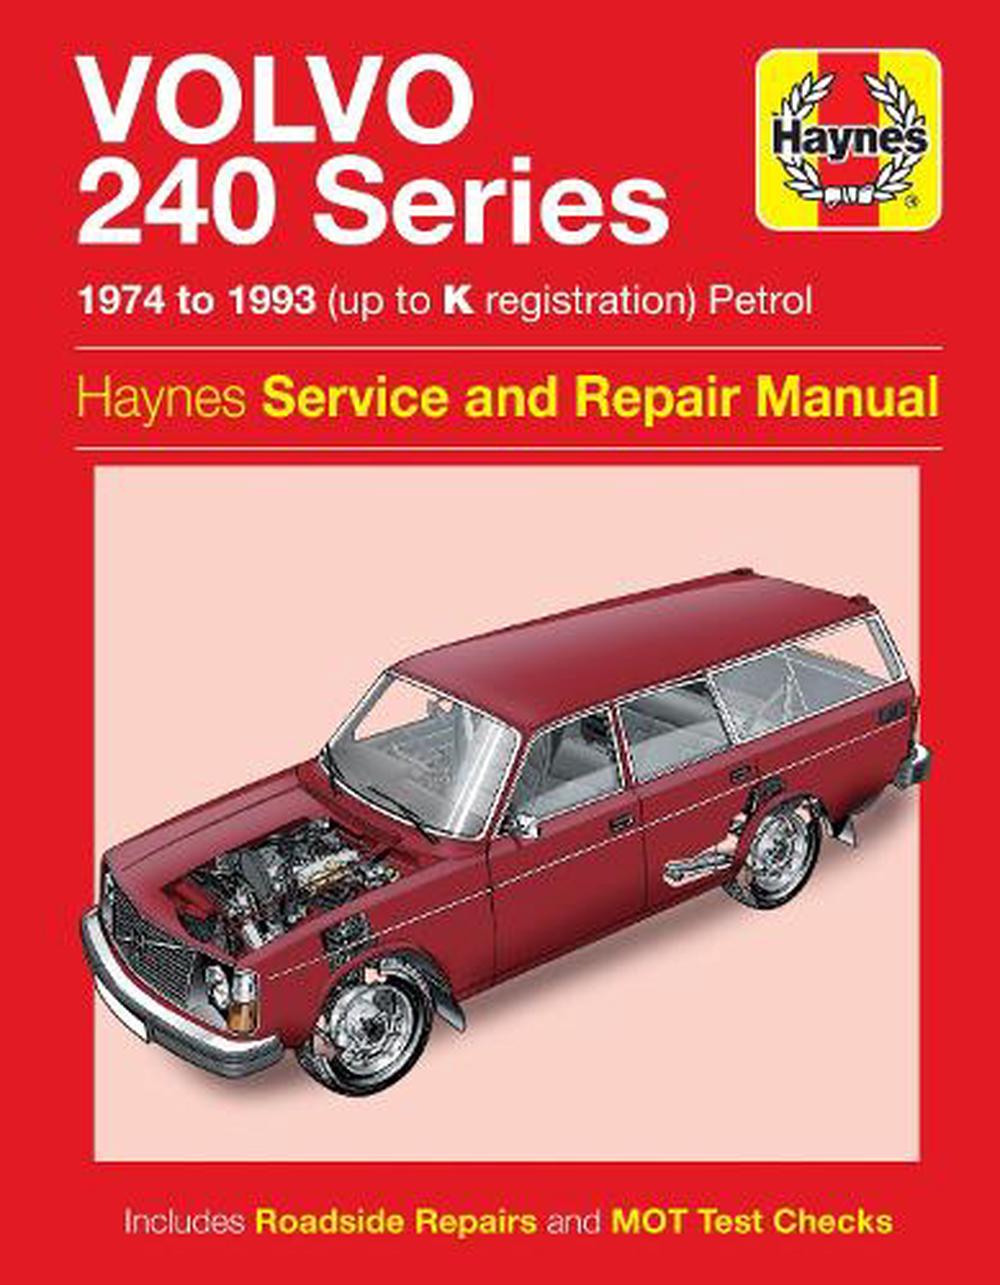 Volvo 240 Series Service and Repair Manual by Haynes Publishing